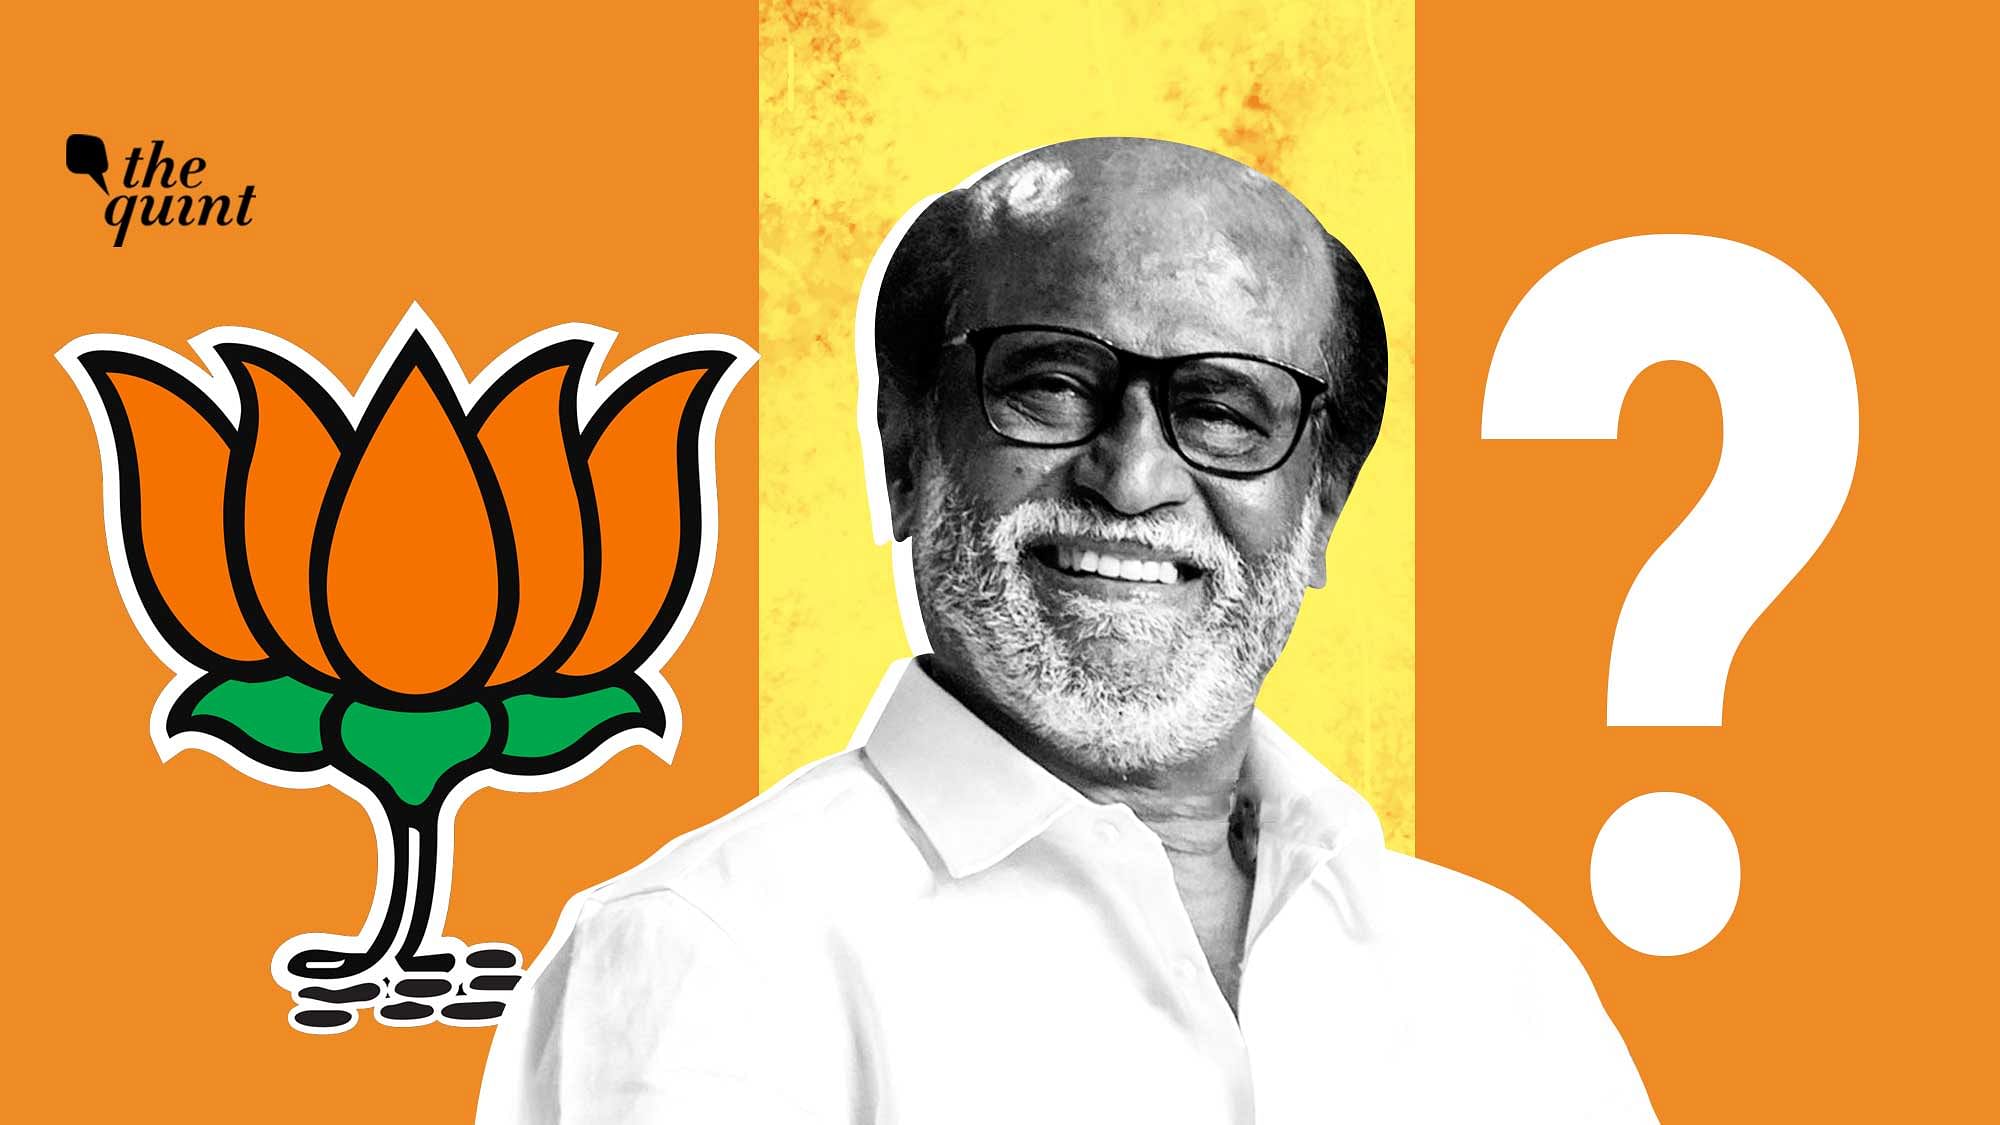 Rajinikanth announced that he won’t start a political party. This may harm BJP’s prospects in Tamil Nadu.